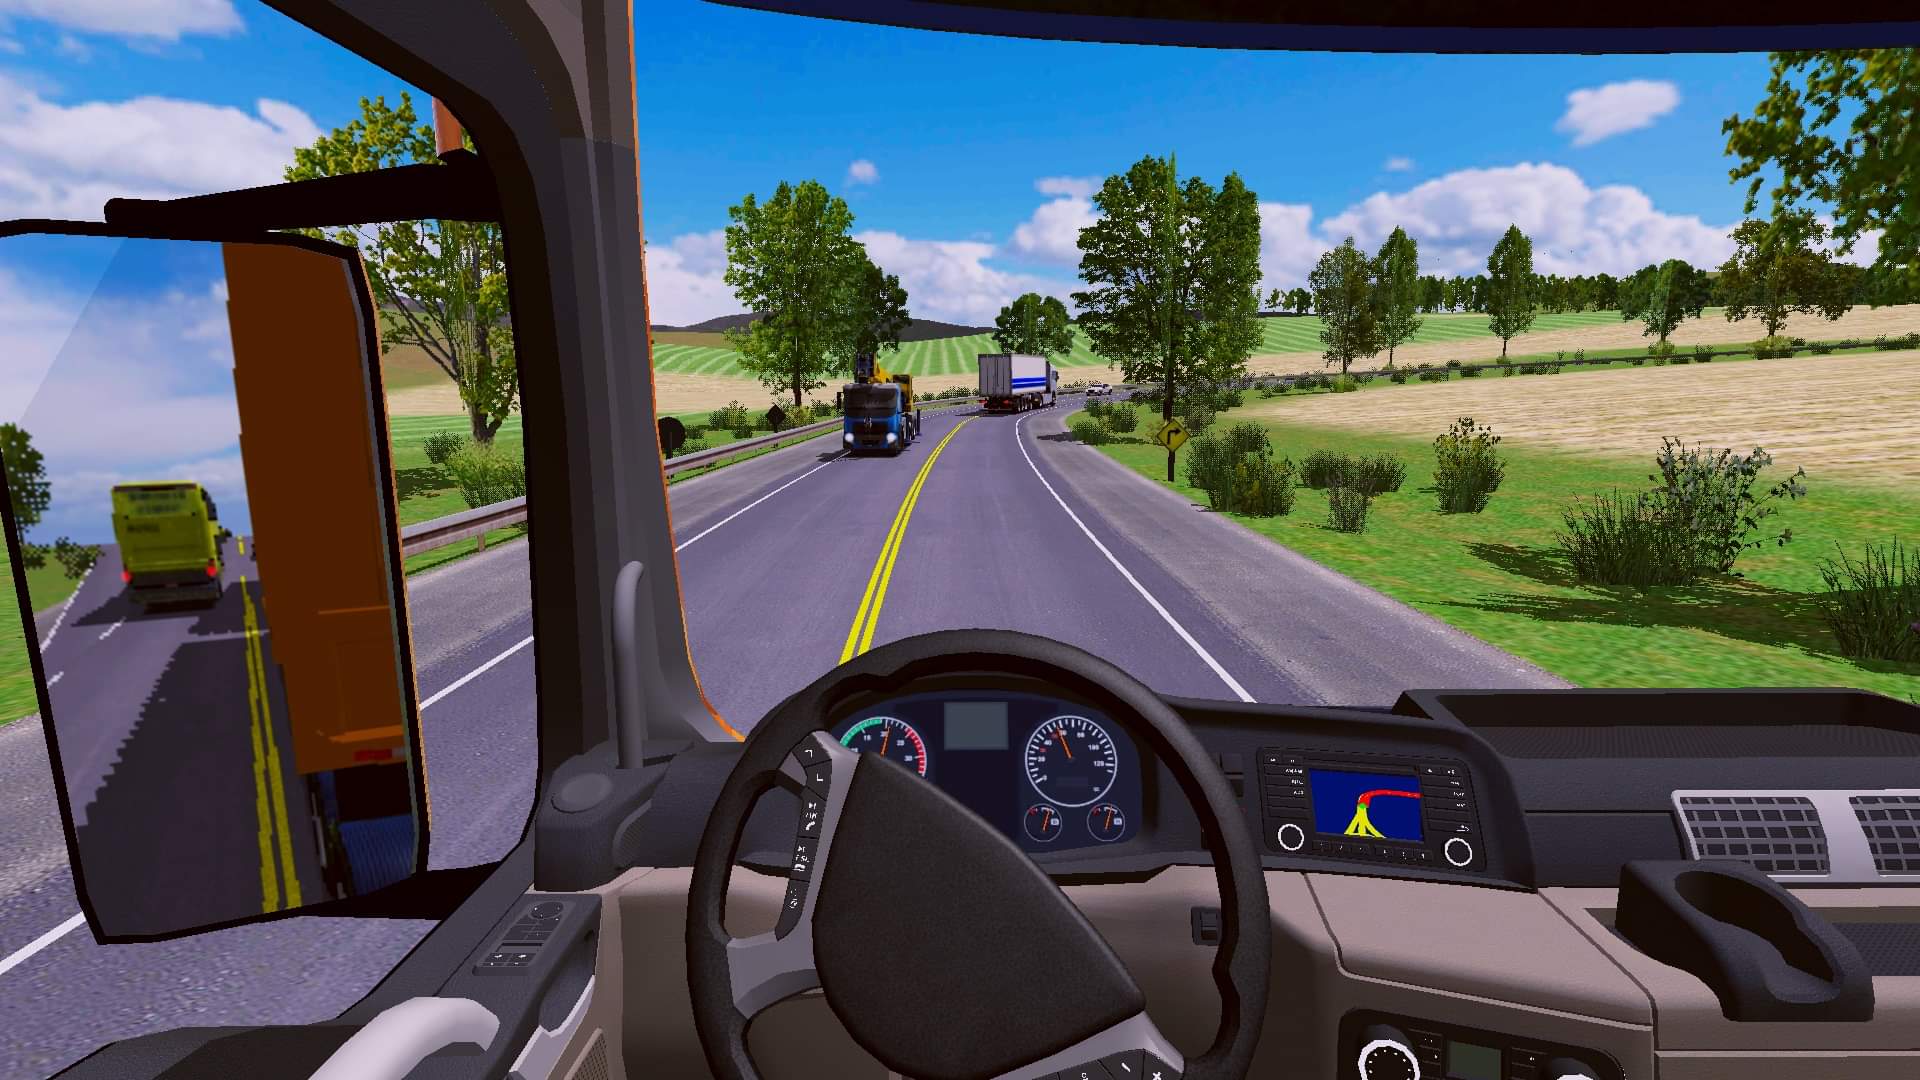 world truck driving simulator game download for pc